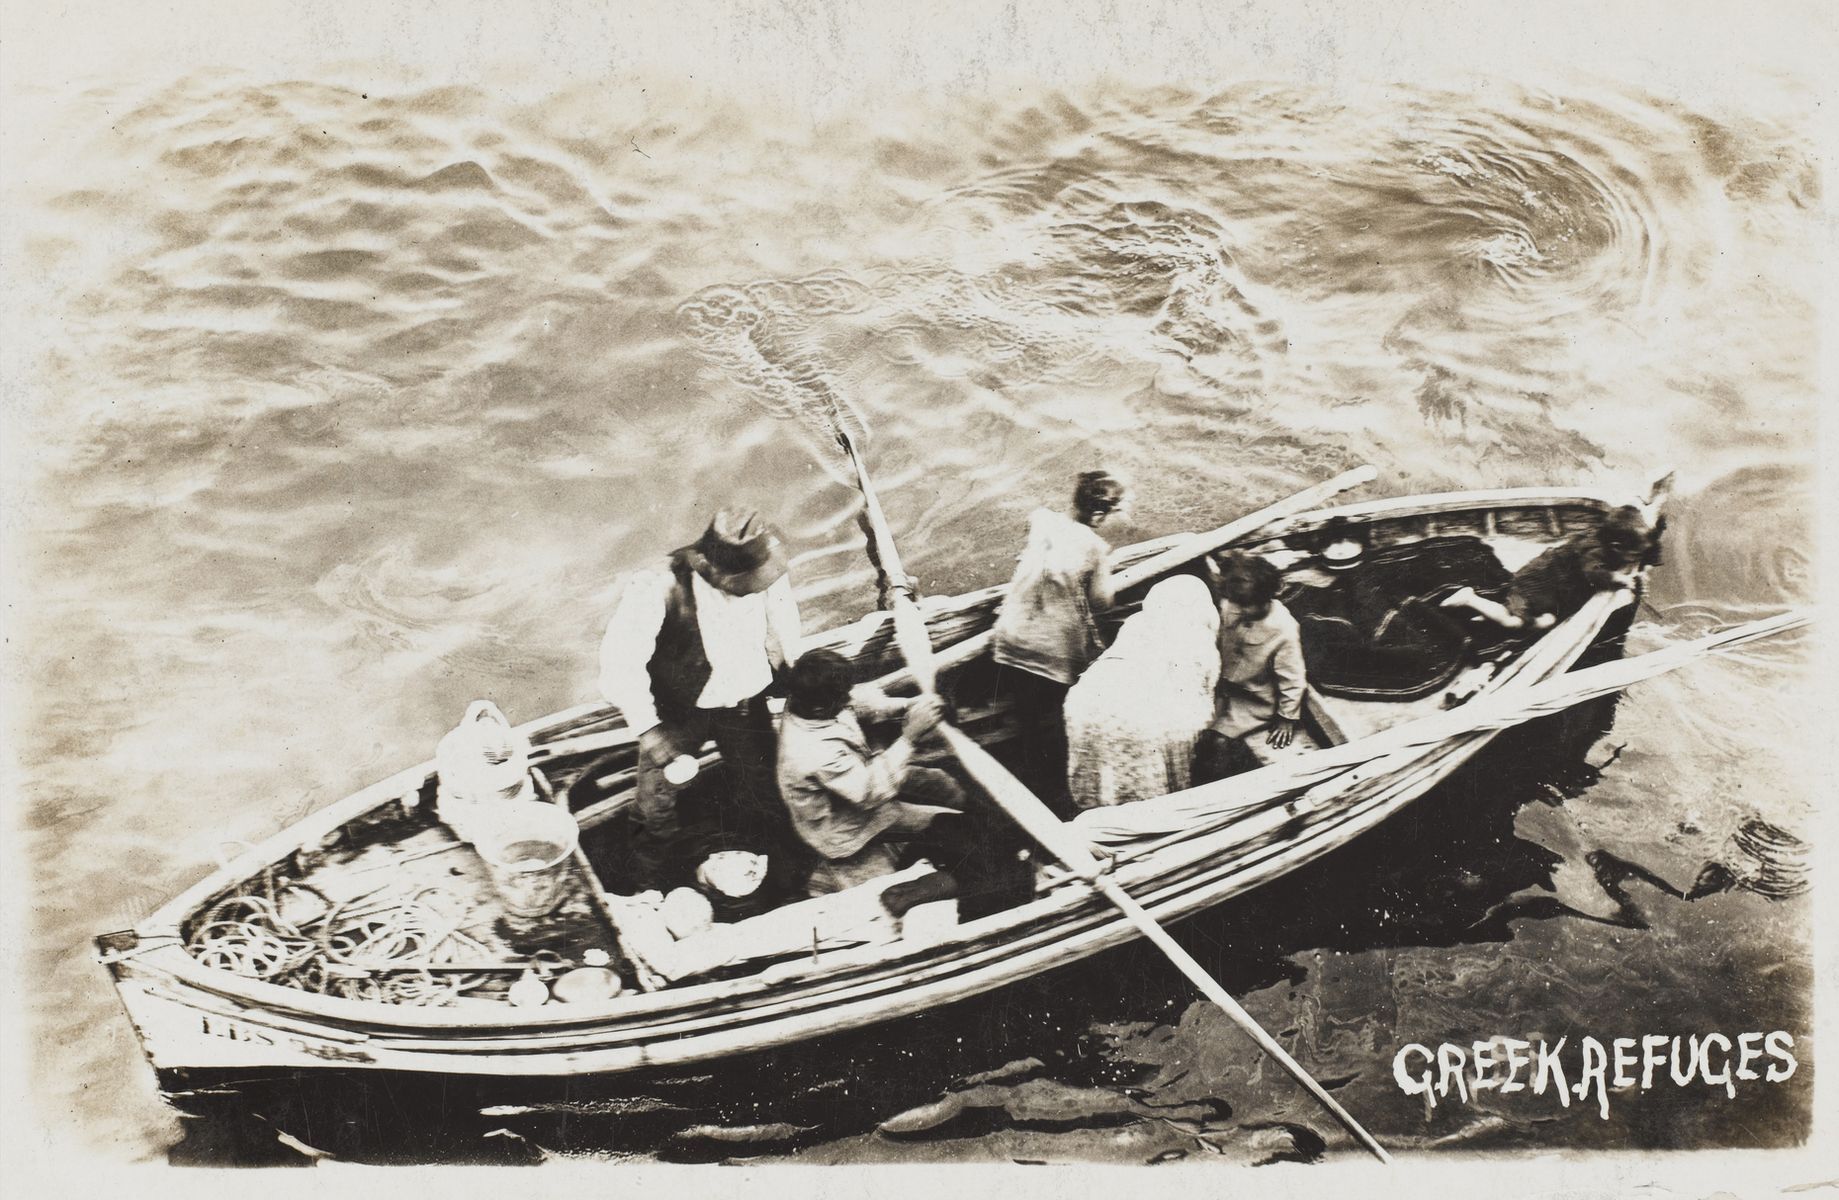 <p>Sadly, the harrowing scenes of refugees fleeing conflict by boat are not new. After World War I, Greece tried to expand its territory into Turkey, as granted by the Treaty of Sèvres in 1920. Nationalist Turks, however, refused to recognize the treaty and fought back.</p><p>The resulting <a href="https://www.britannica.com/event/Greco-Turkish-wars">Greco-Turkish War</a> (1919–1922) ultimately forced the Greek government to return the lands to Turkey, and the two governments exchanged minority populations. In the exchange, over <a href="https://www.euronews.com/2020/09/11/we-have-not-forgotten-families-of-greek-refugees-who-fled-turkey-in-1922-tell-their-storie">a million Greeks</a> were expelled from Turkey, while roughly <a href="https://merip.org/2013/06/the-greek-turkish-population-exchange/">half a million Muslims</a> were forcibly removed from Greece.</p>